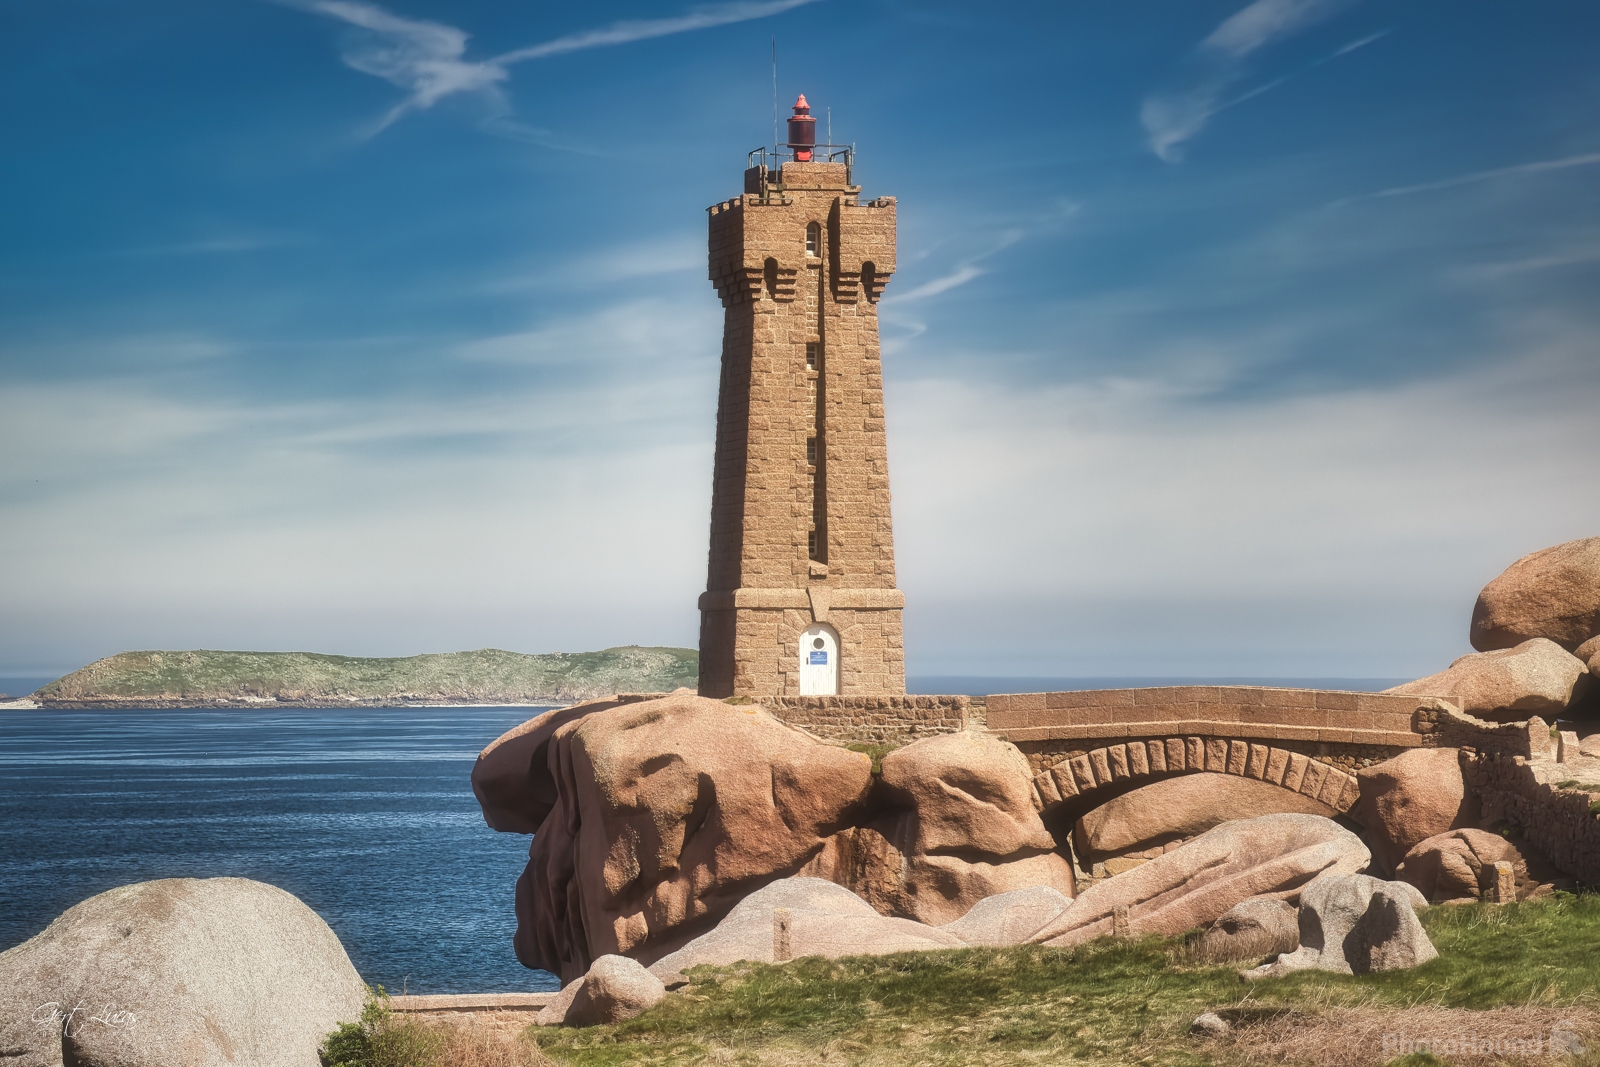 Image of Mean Ruz Lighthouse, Perros-Guirec, France by Gert Lucas